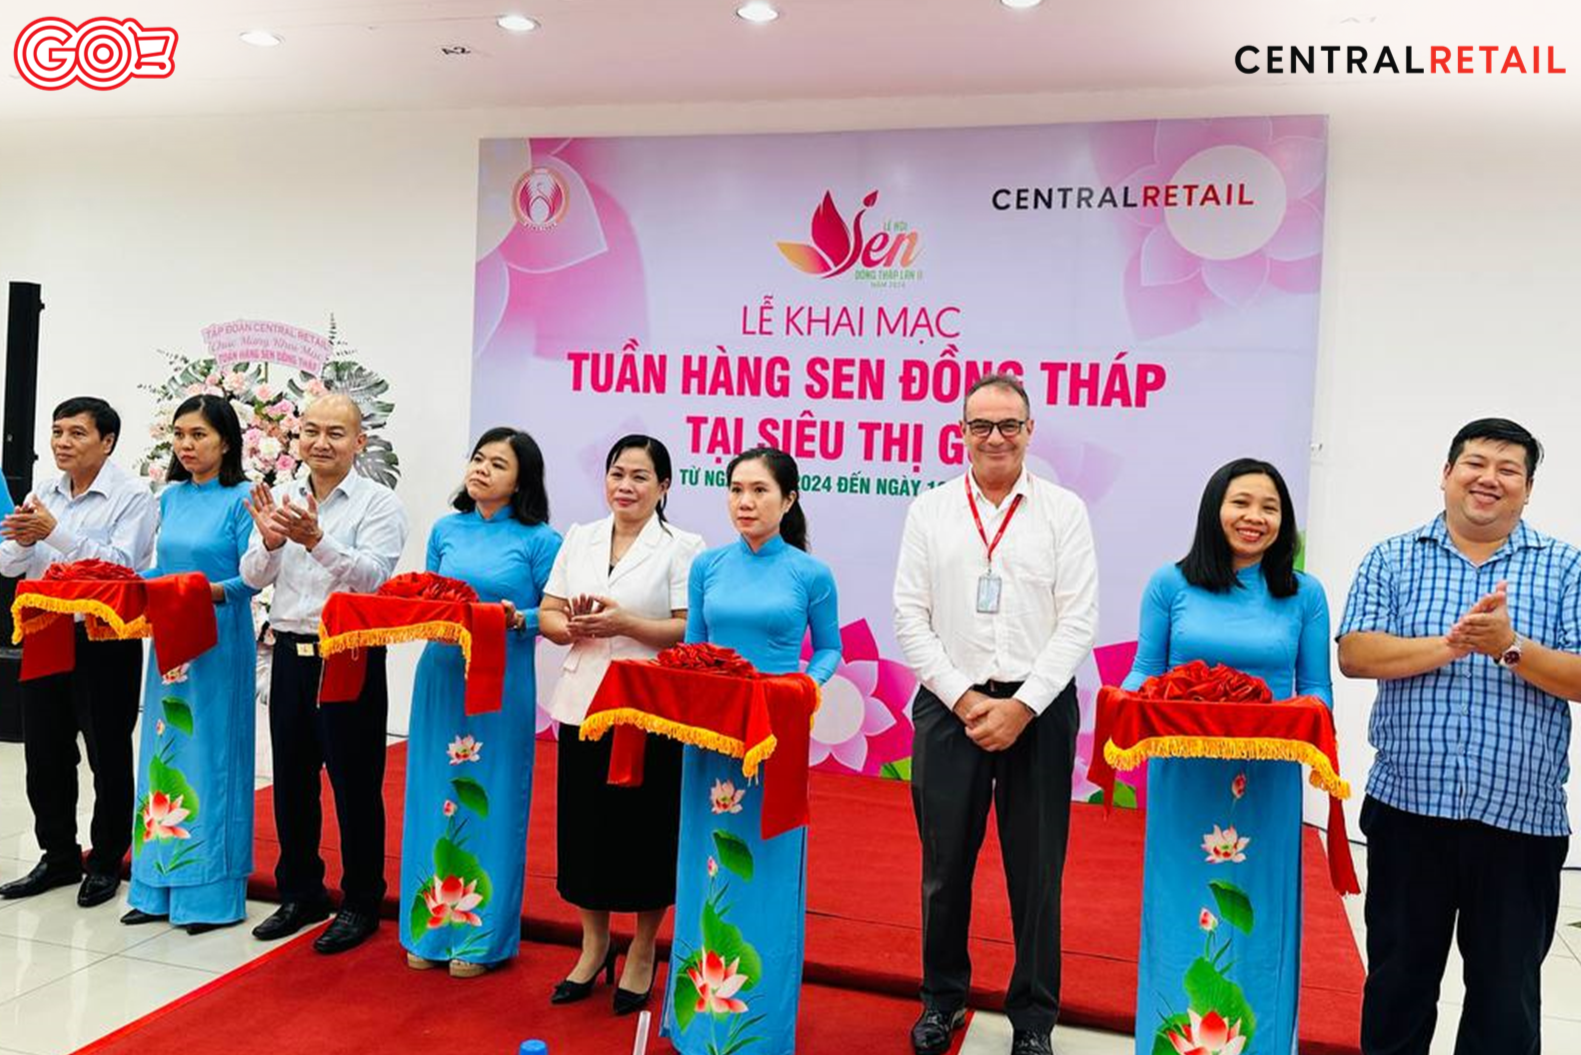 Central Retail in Vietnam joined hands with the Department of Industry and Trade of Dong Thap Province and organized the Dong Thap Lotus Week